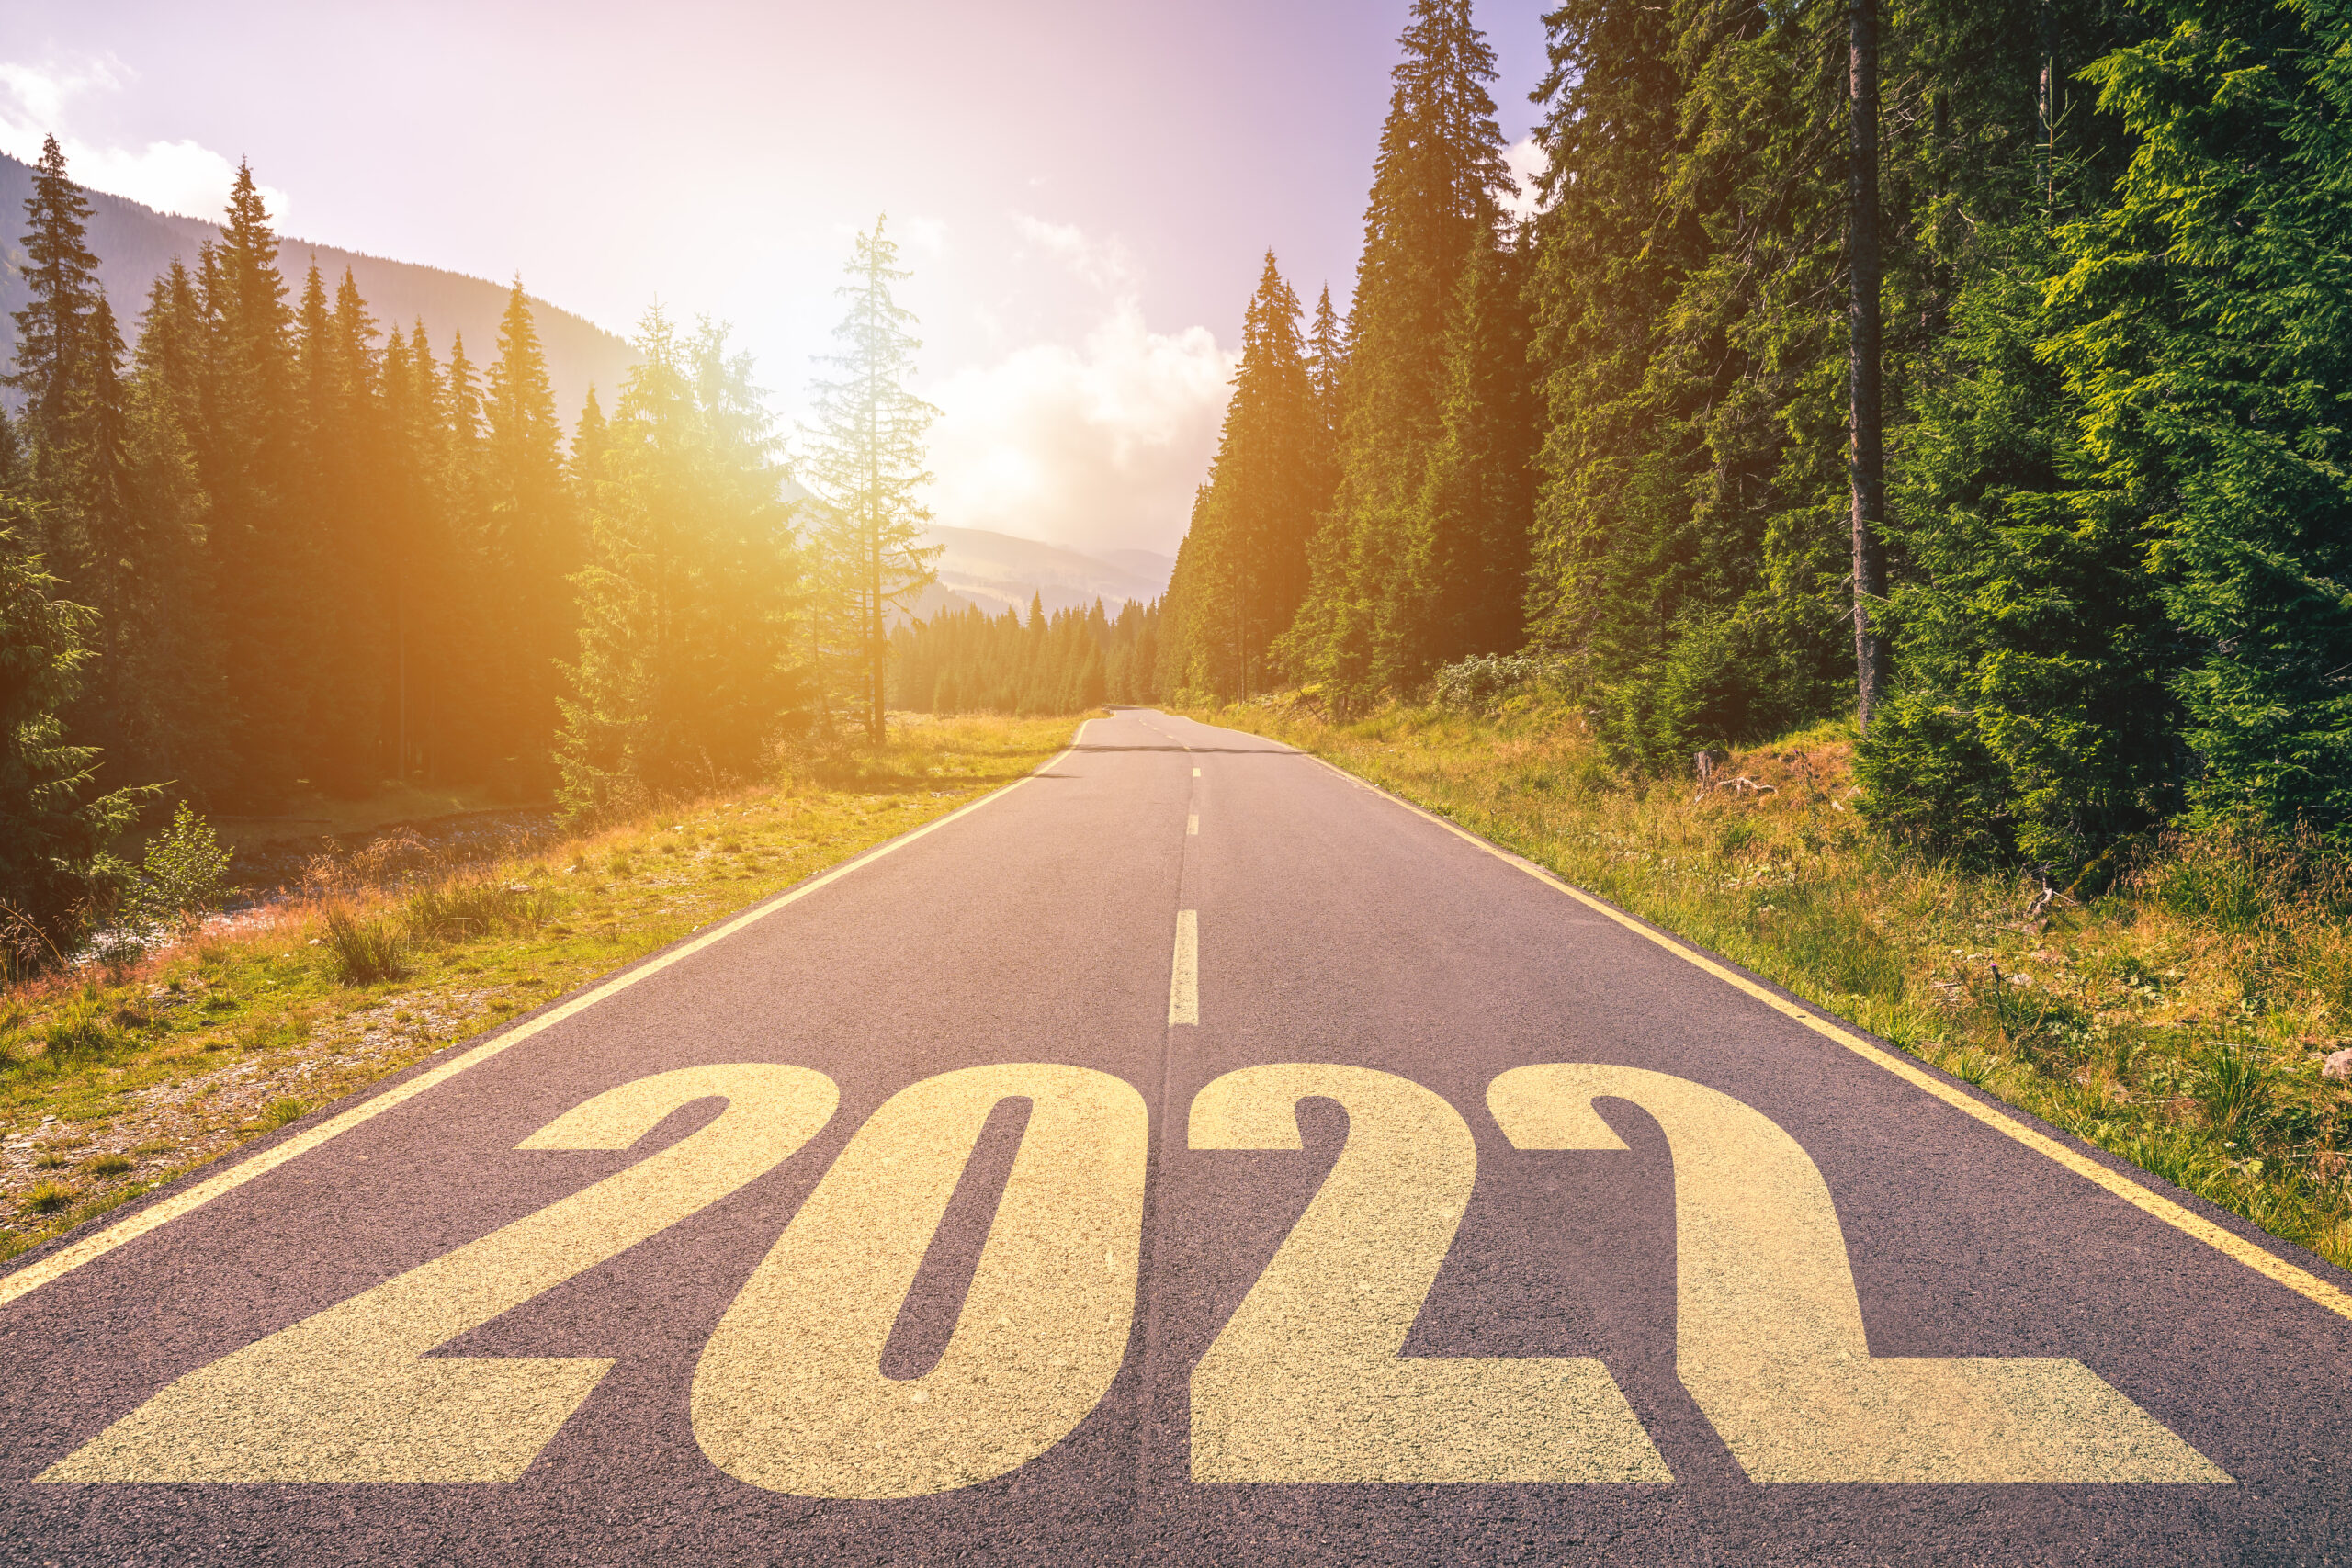 The Critical Skill to Have in Your 2022 Talent Development Roadmap